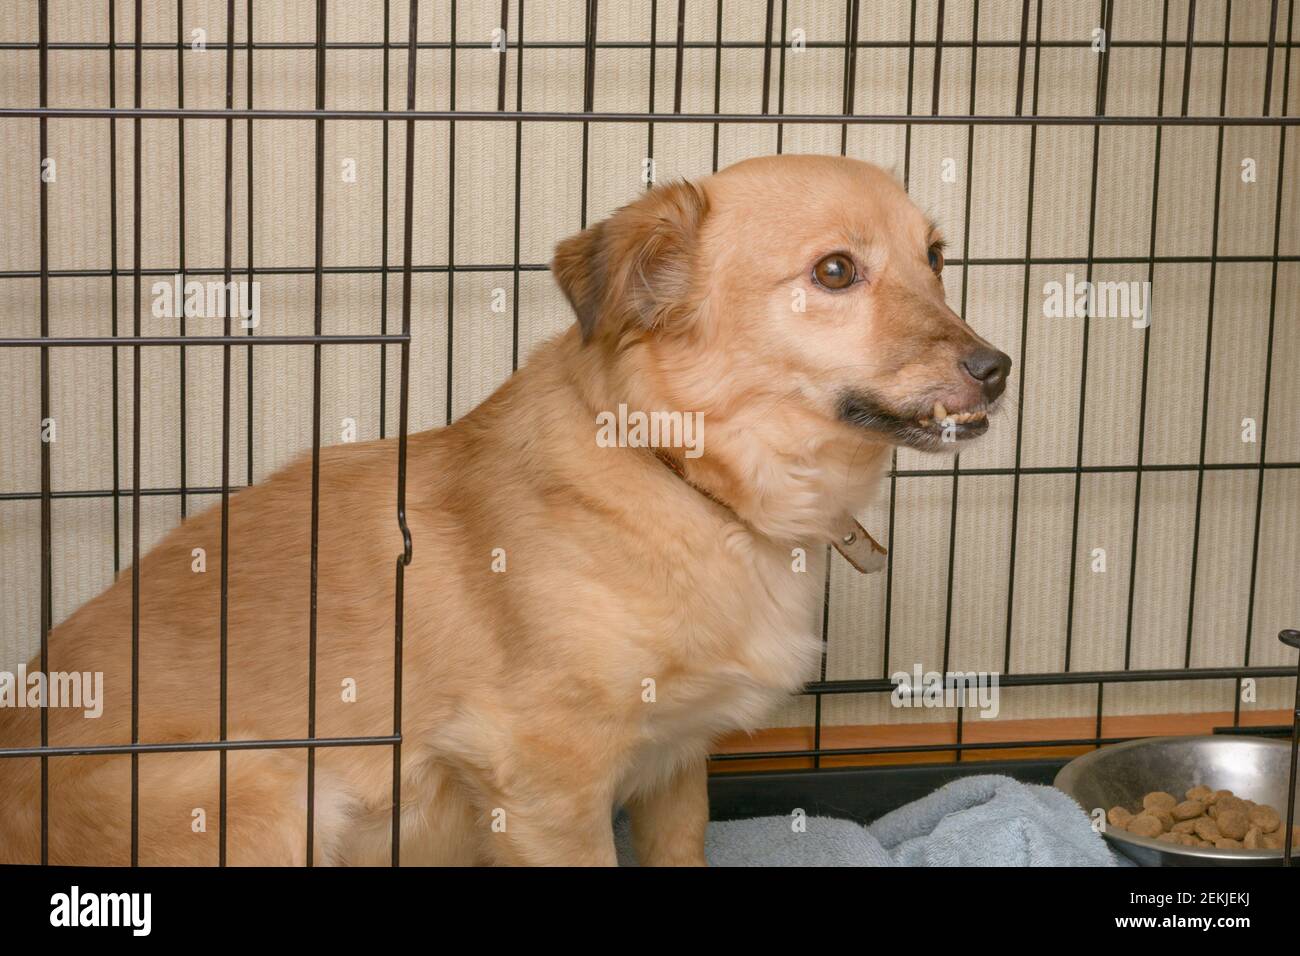 Dog with jaw defect sits in cage at animal shelter. Dog with crooked teeth is waiting for new owner. Pet care concept. Stock Photo